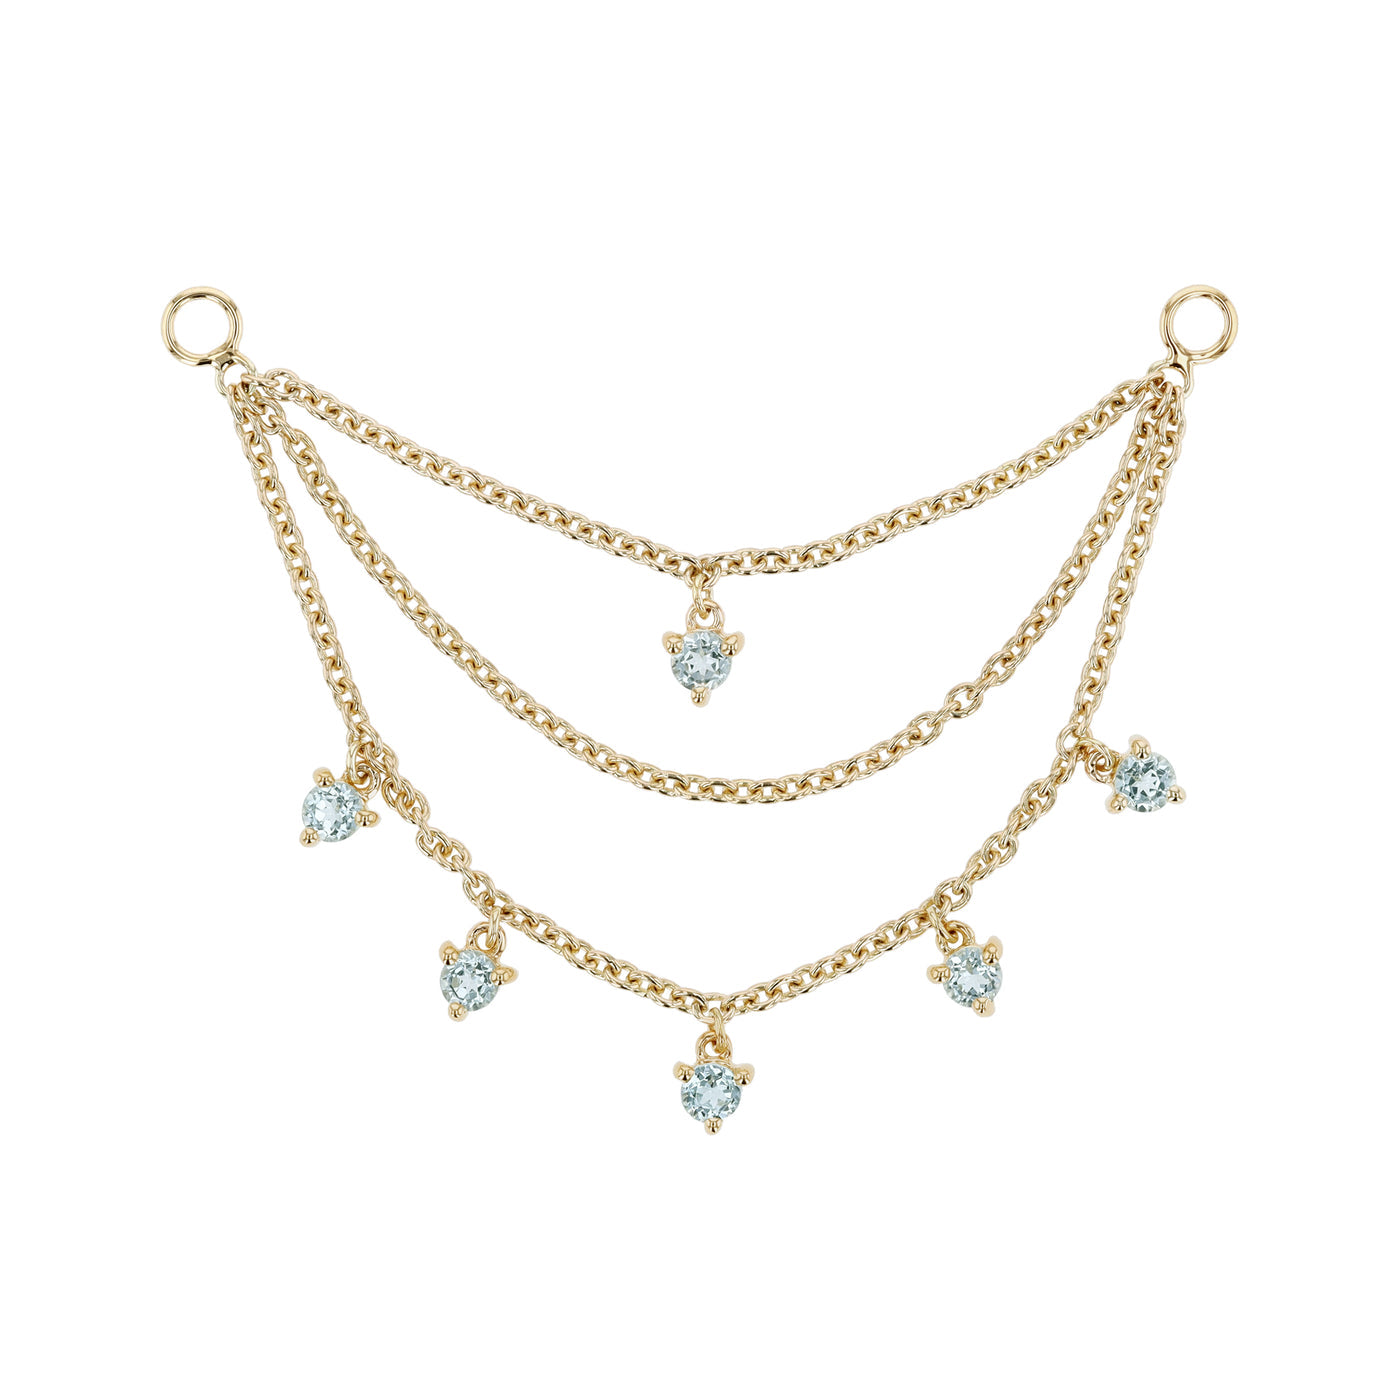 MODERN MOOD - TRIPLE CHAIN WITH DRIPPING GEMSTONES - 14KT SOLID GOLD - CHAIN